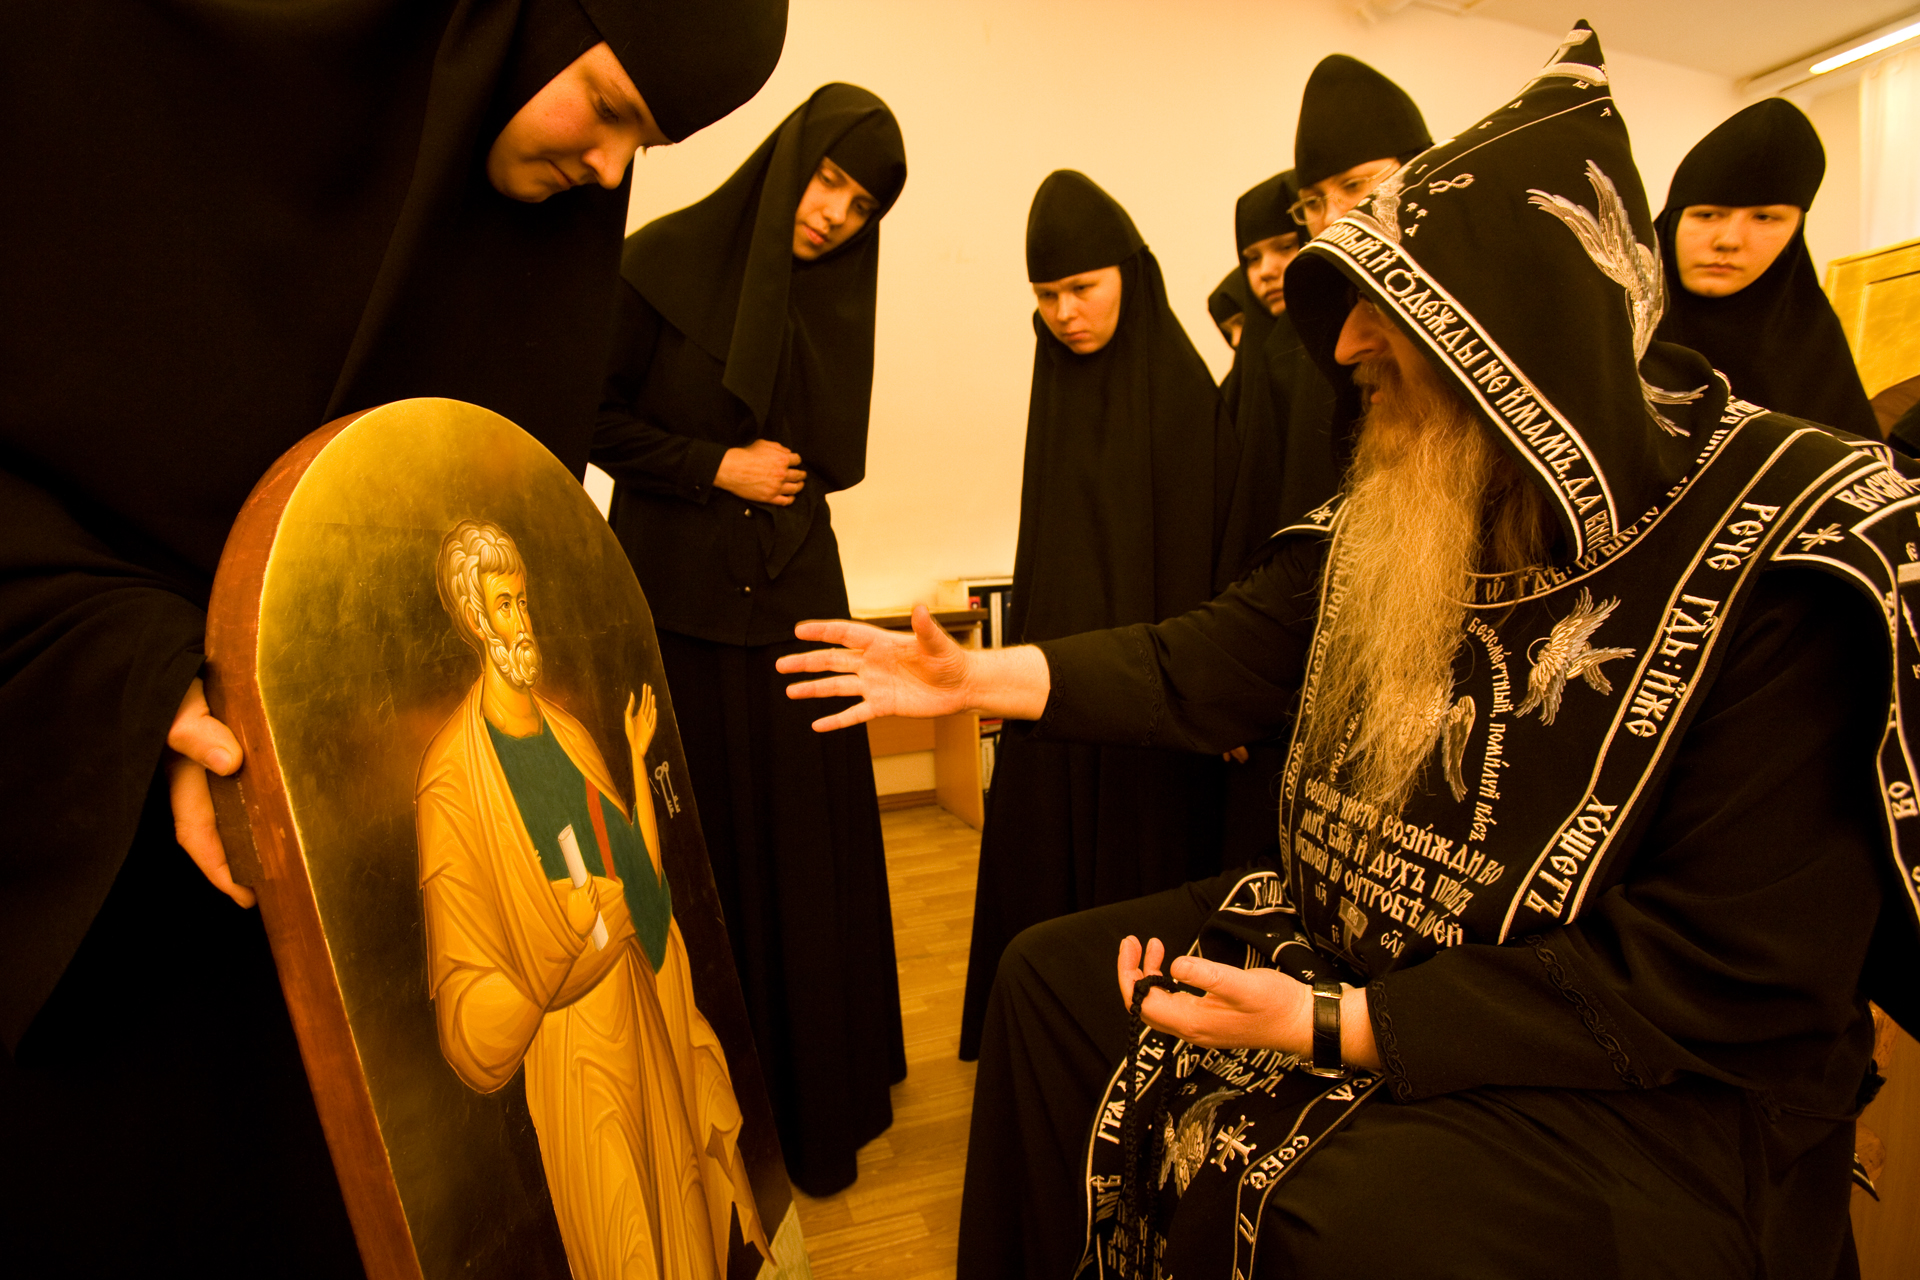  Judgment day arrives at Novo-Tikhvinsky cloister when Father Abraham sits down to critique icons painted by resident nuns.  Yekaterinburg, Russia  